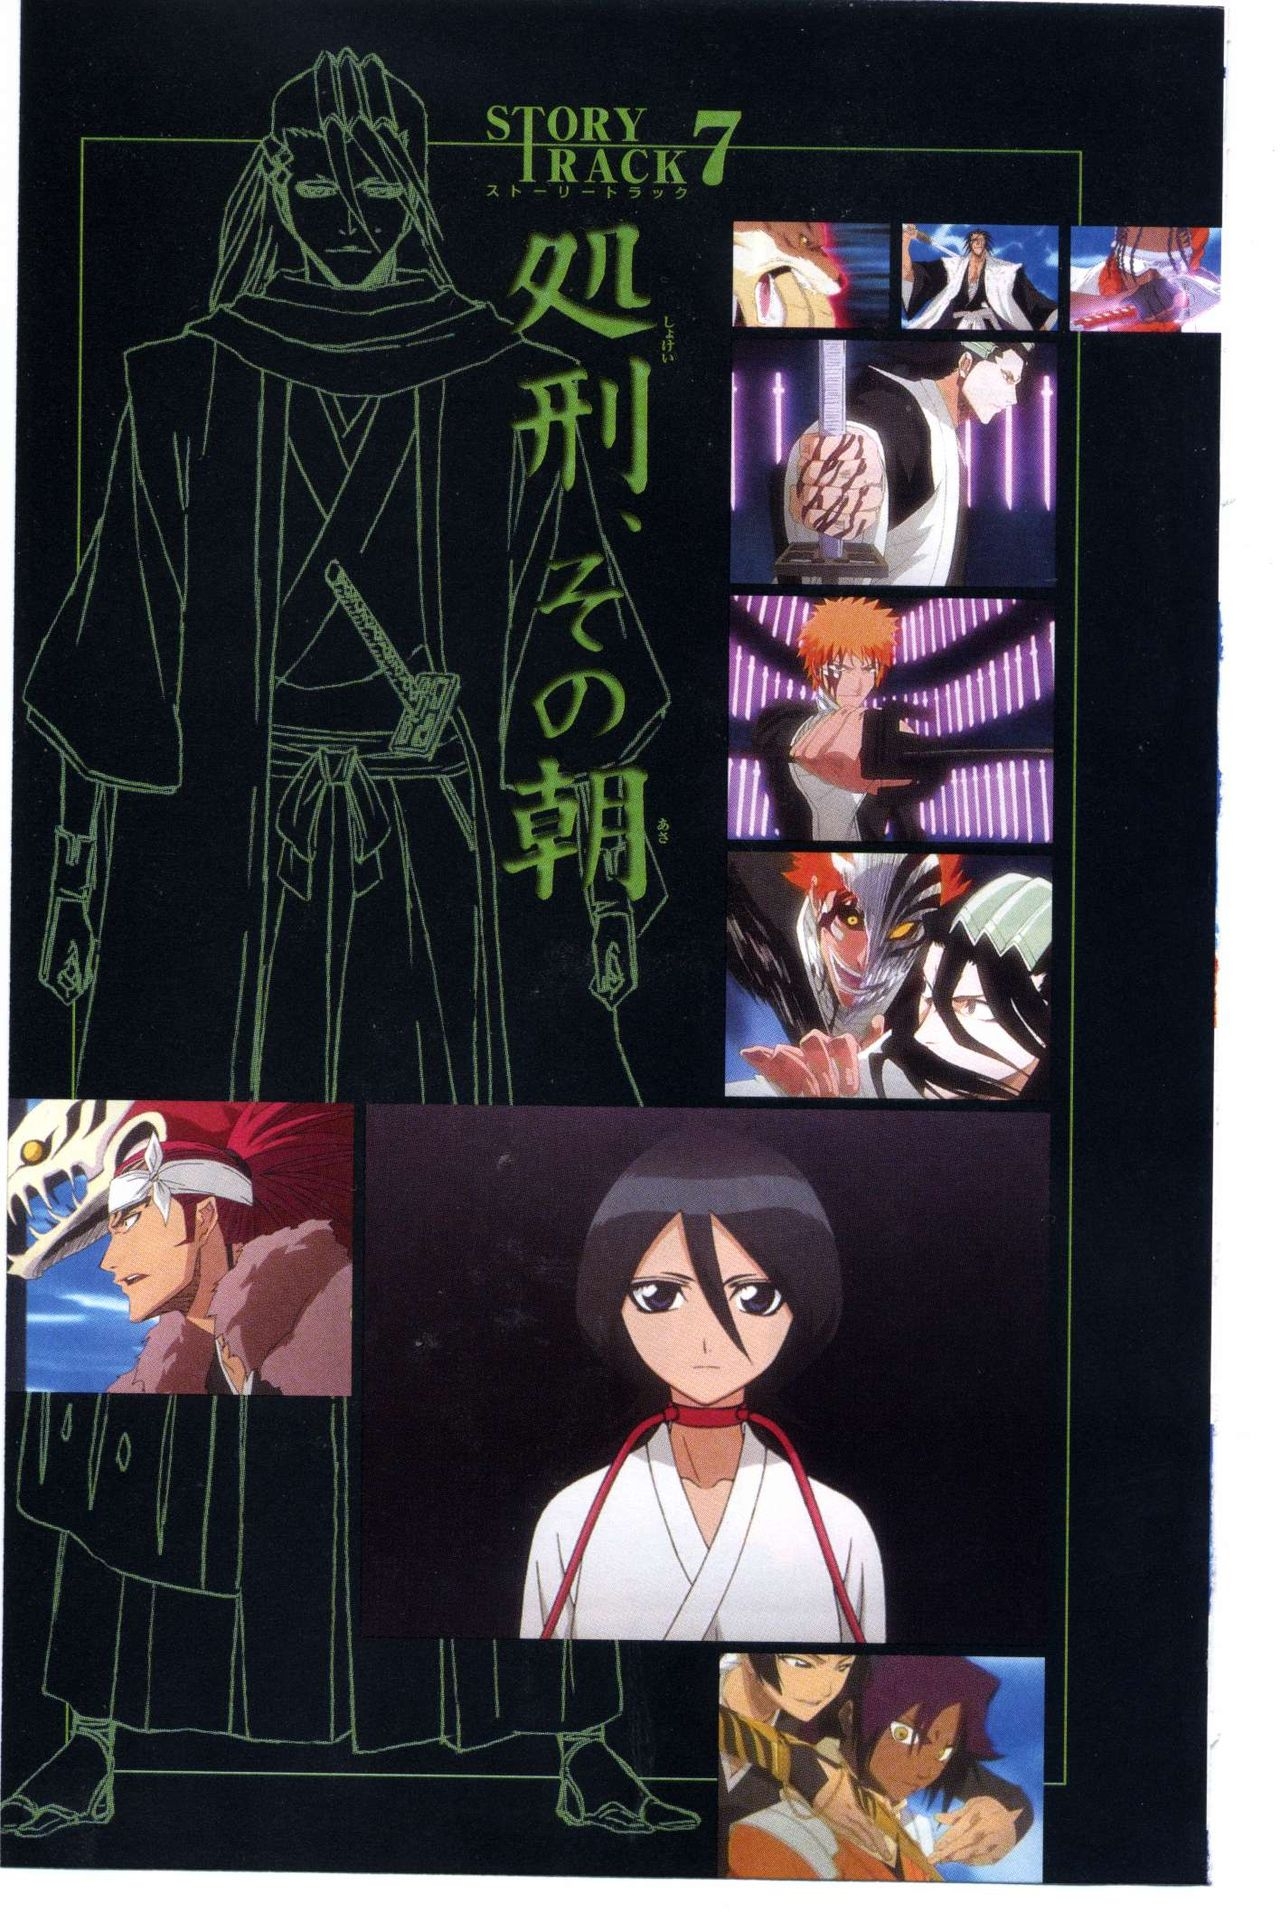 Bleach: Official Animation Book VIBEs 141